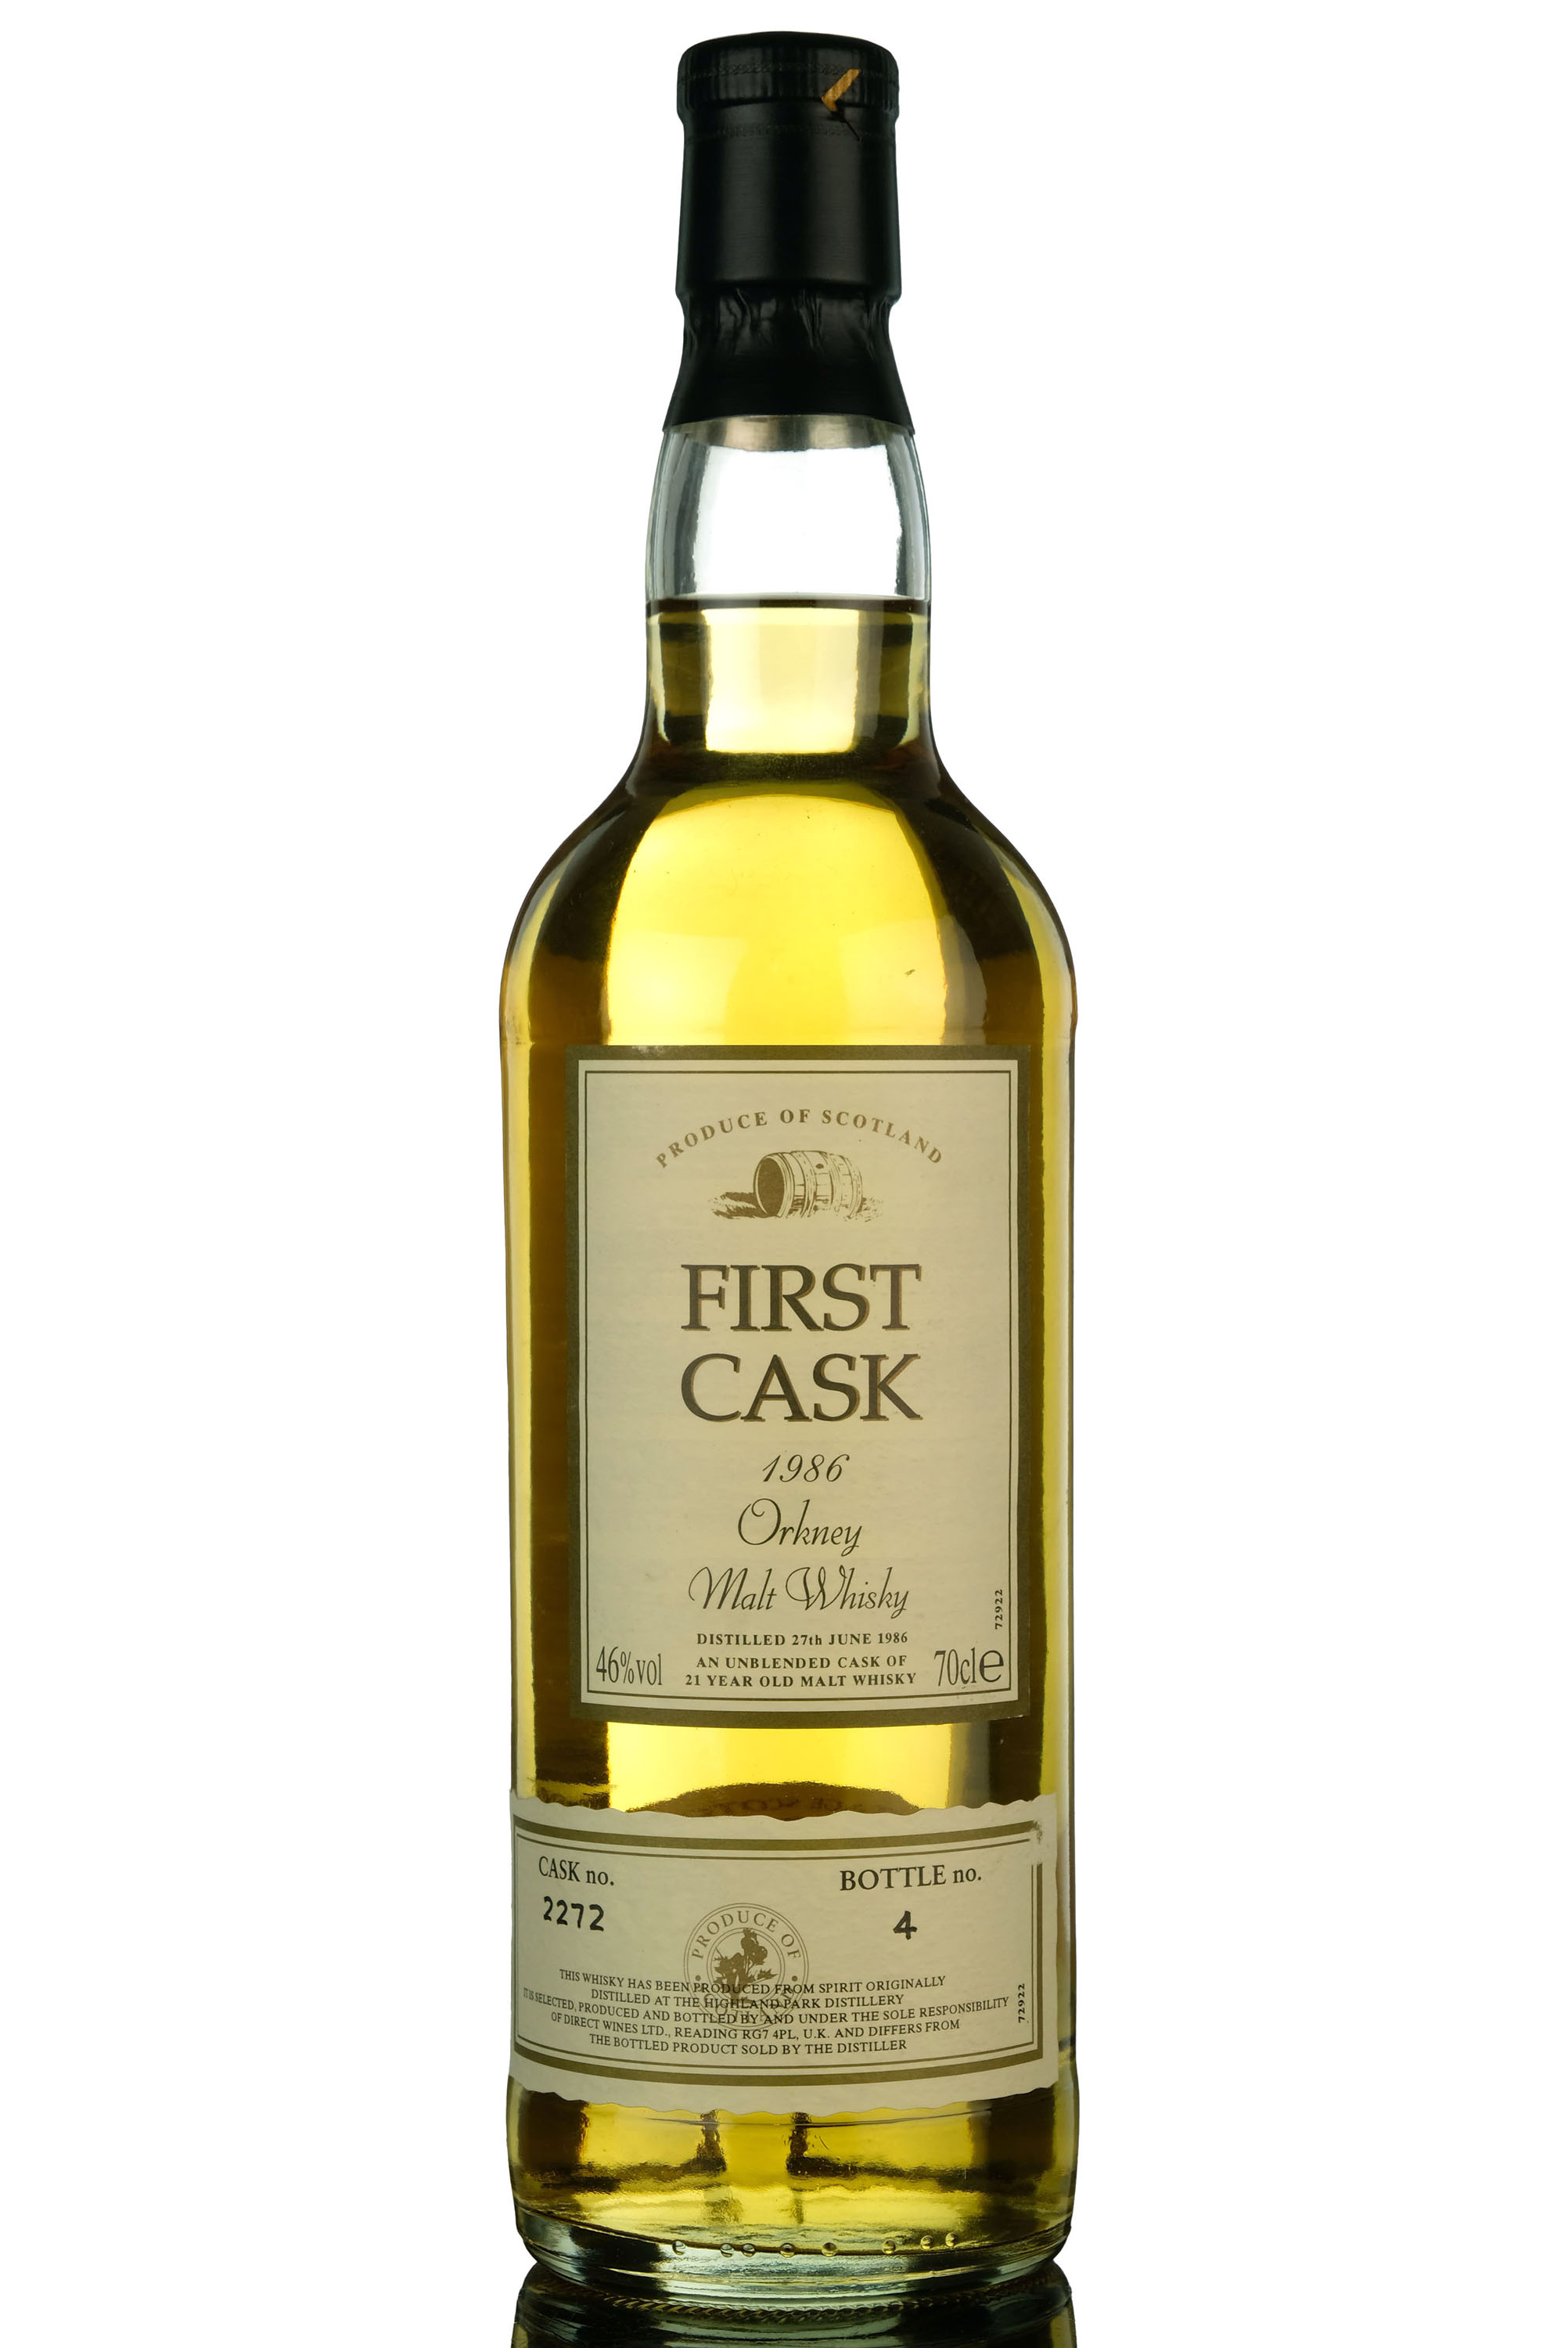 Highland Park 1986 - 21 Year Old - First Cask - Single Cask 2272